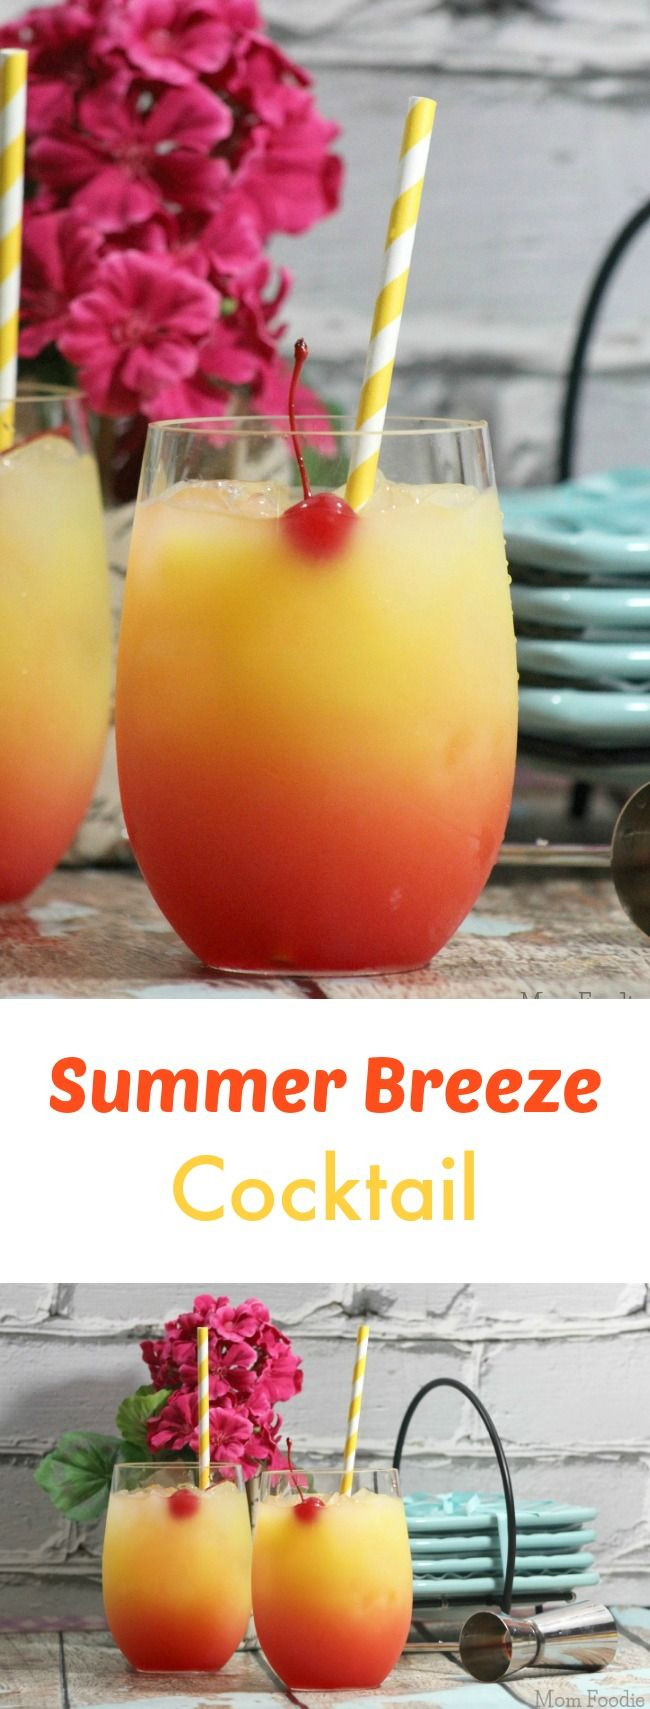 Summer Drink Recipe Alcoholic
 Summer Breeze Cocktail Recipe great for parties